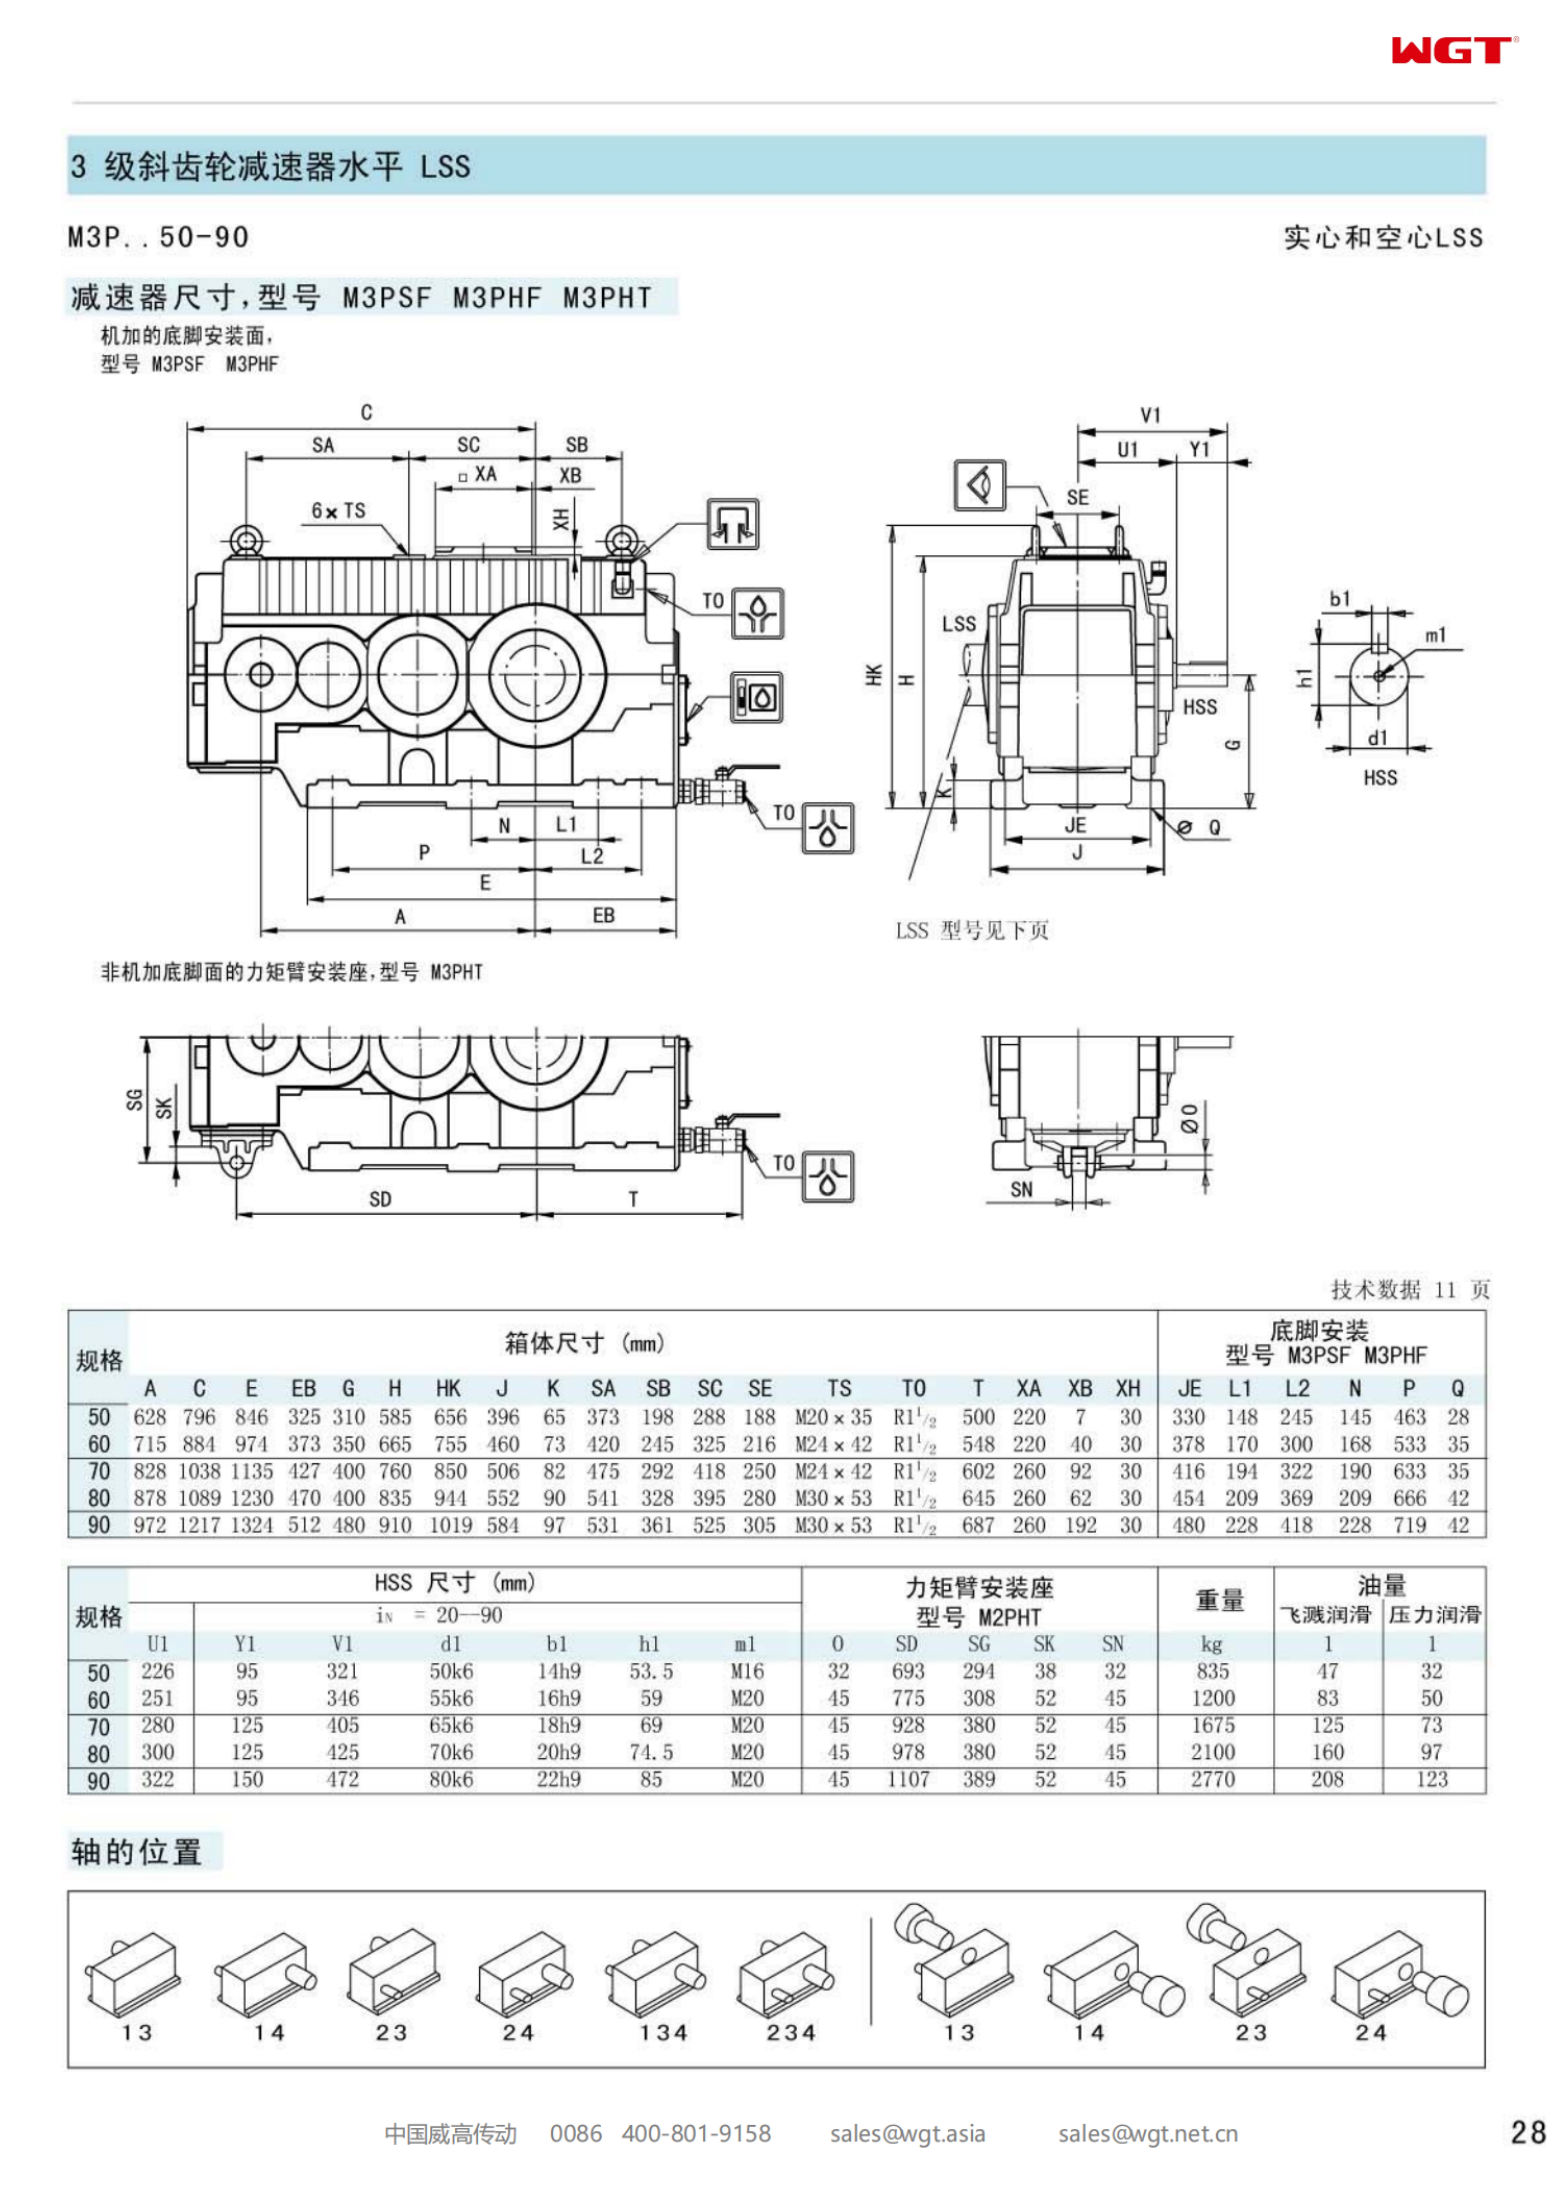 M3PSF60 Replace_SEW_M_Series Gearbox